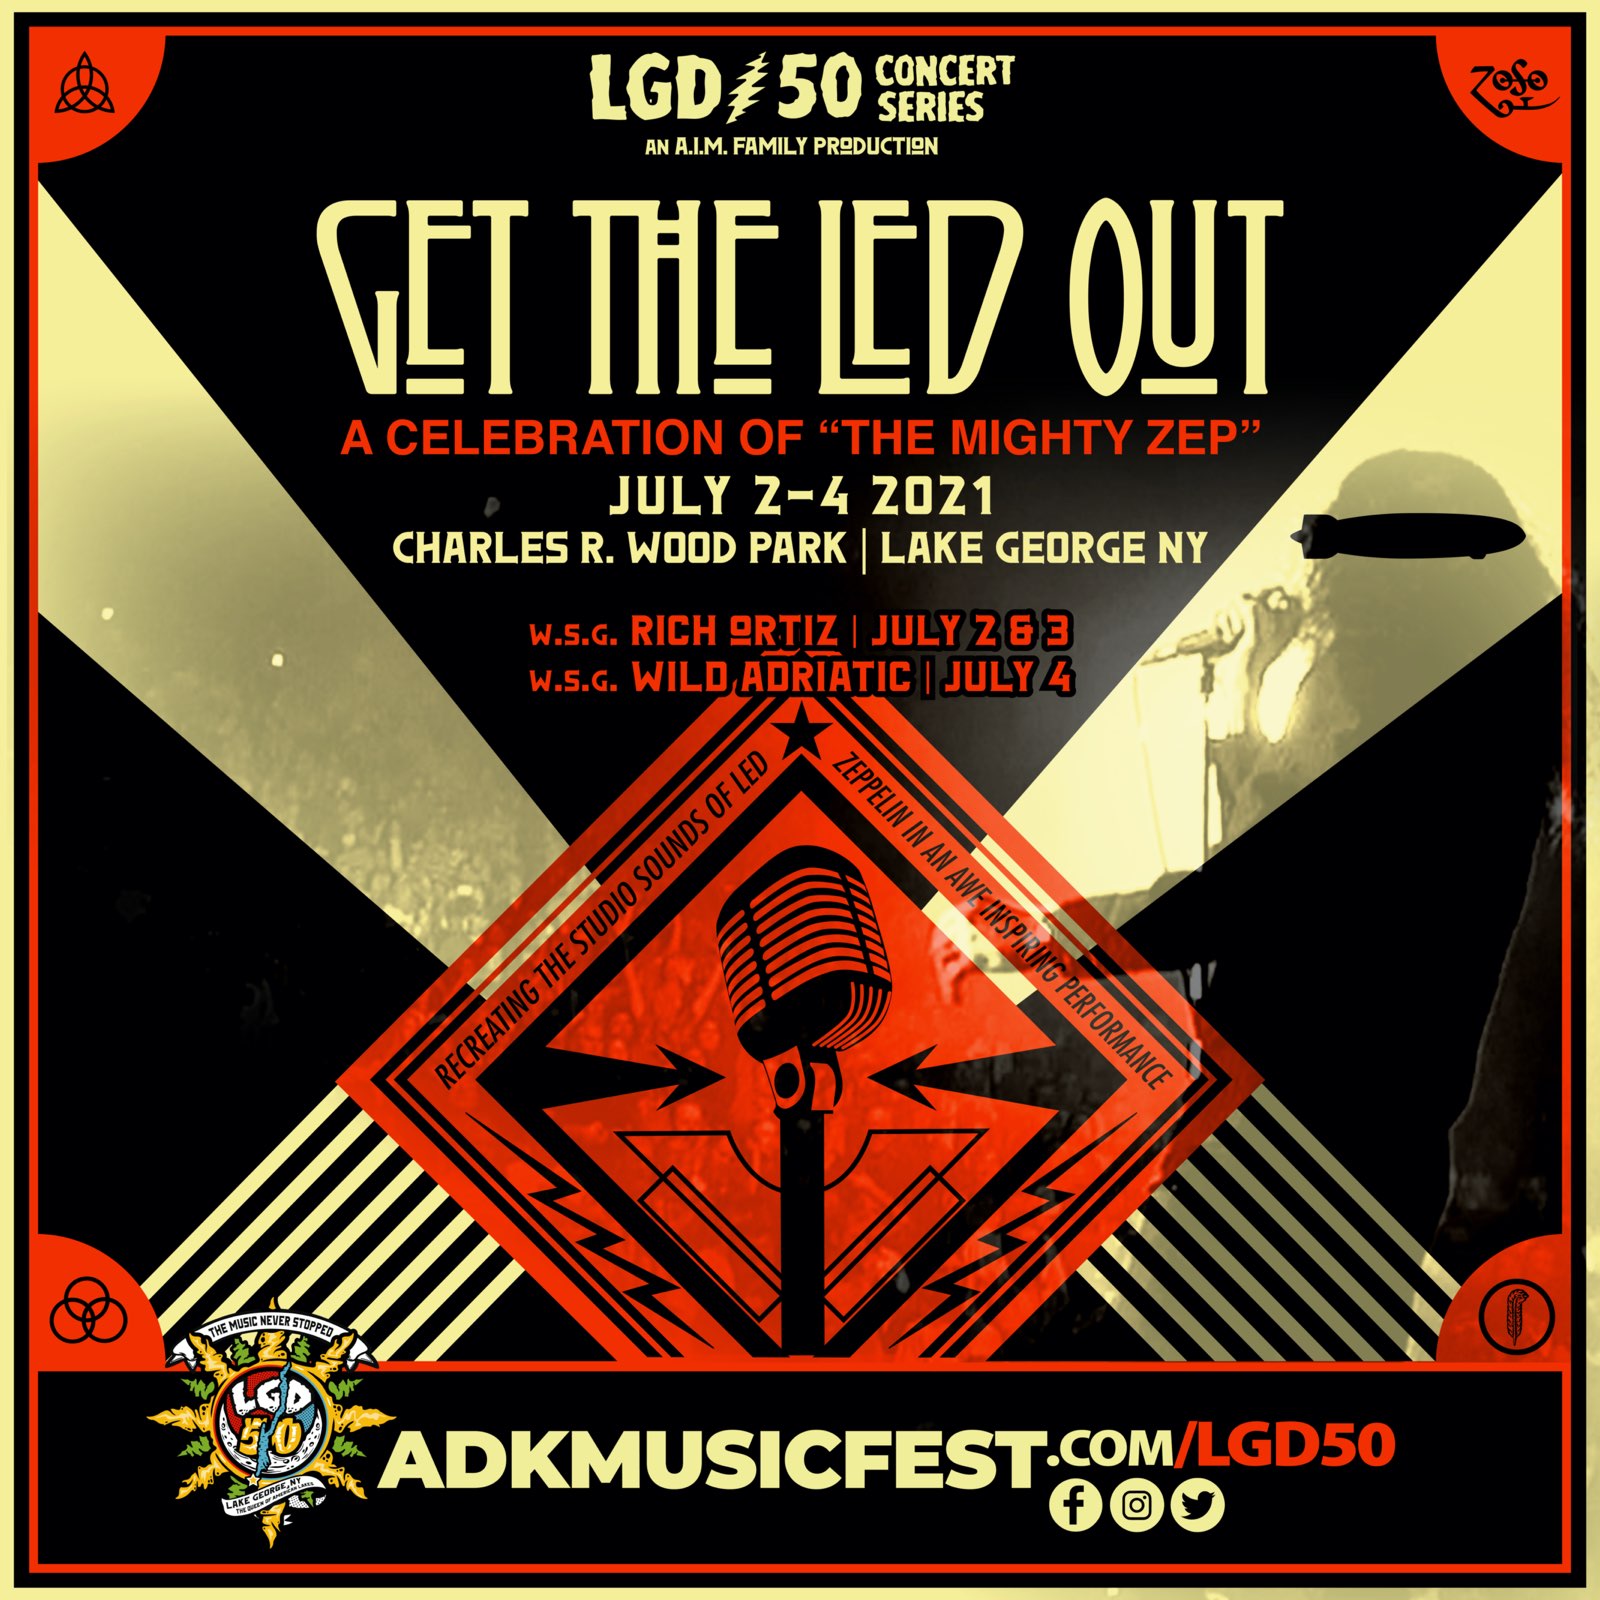 Get The Led Out w/s/g Rich Ortiz 102.7 WEQXFM The Real Alternative